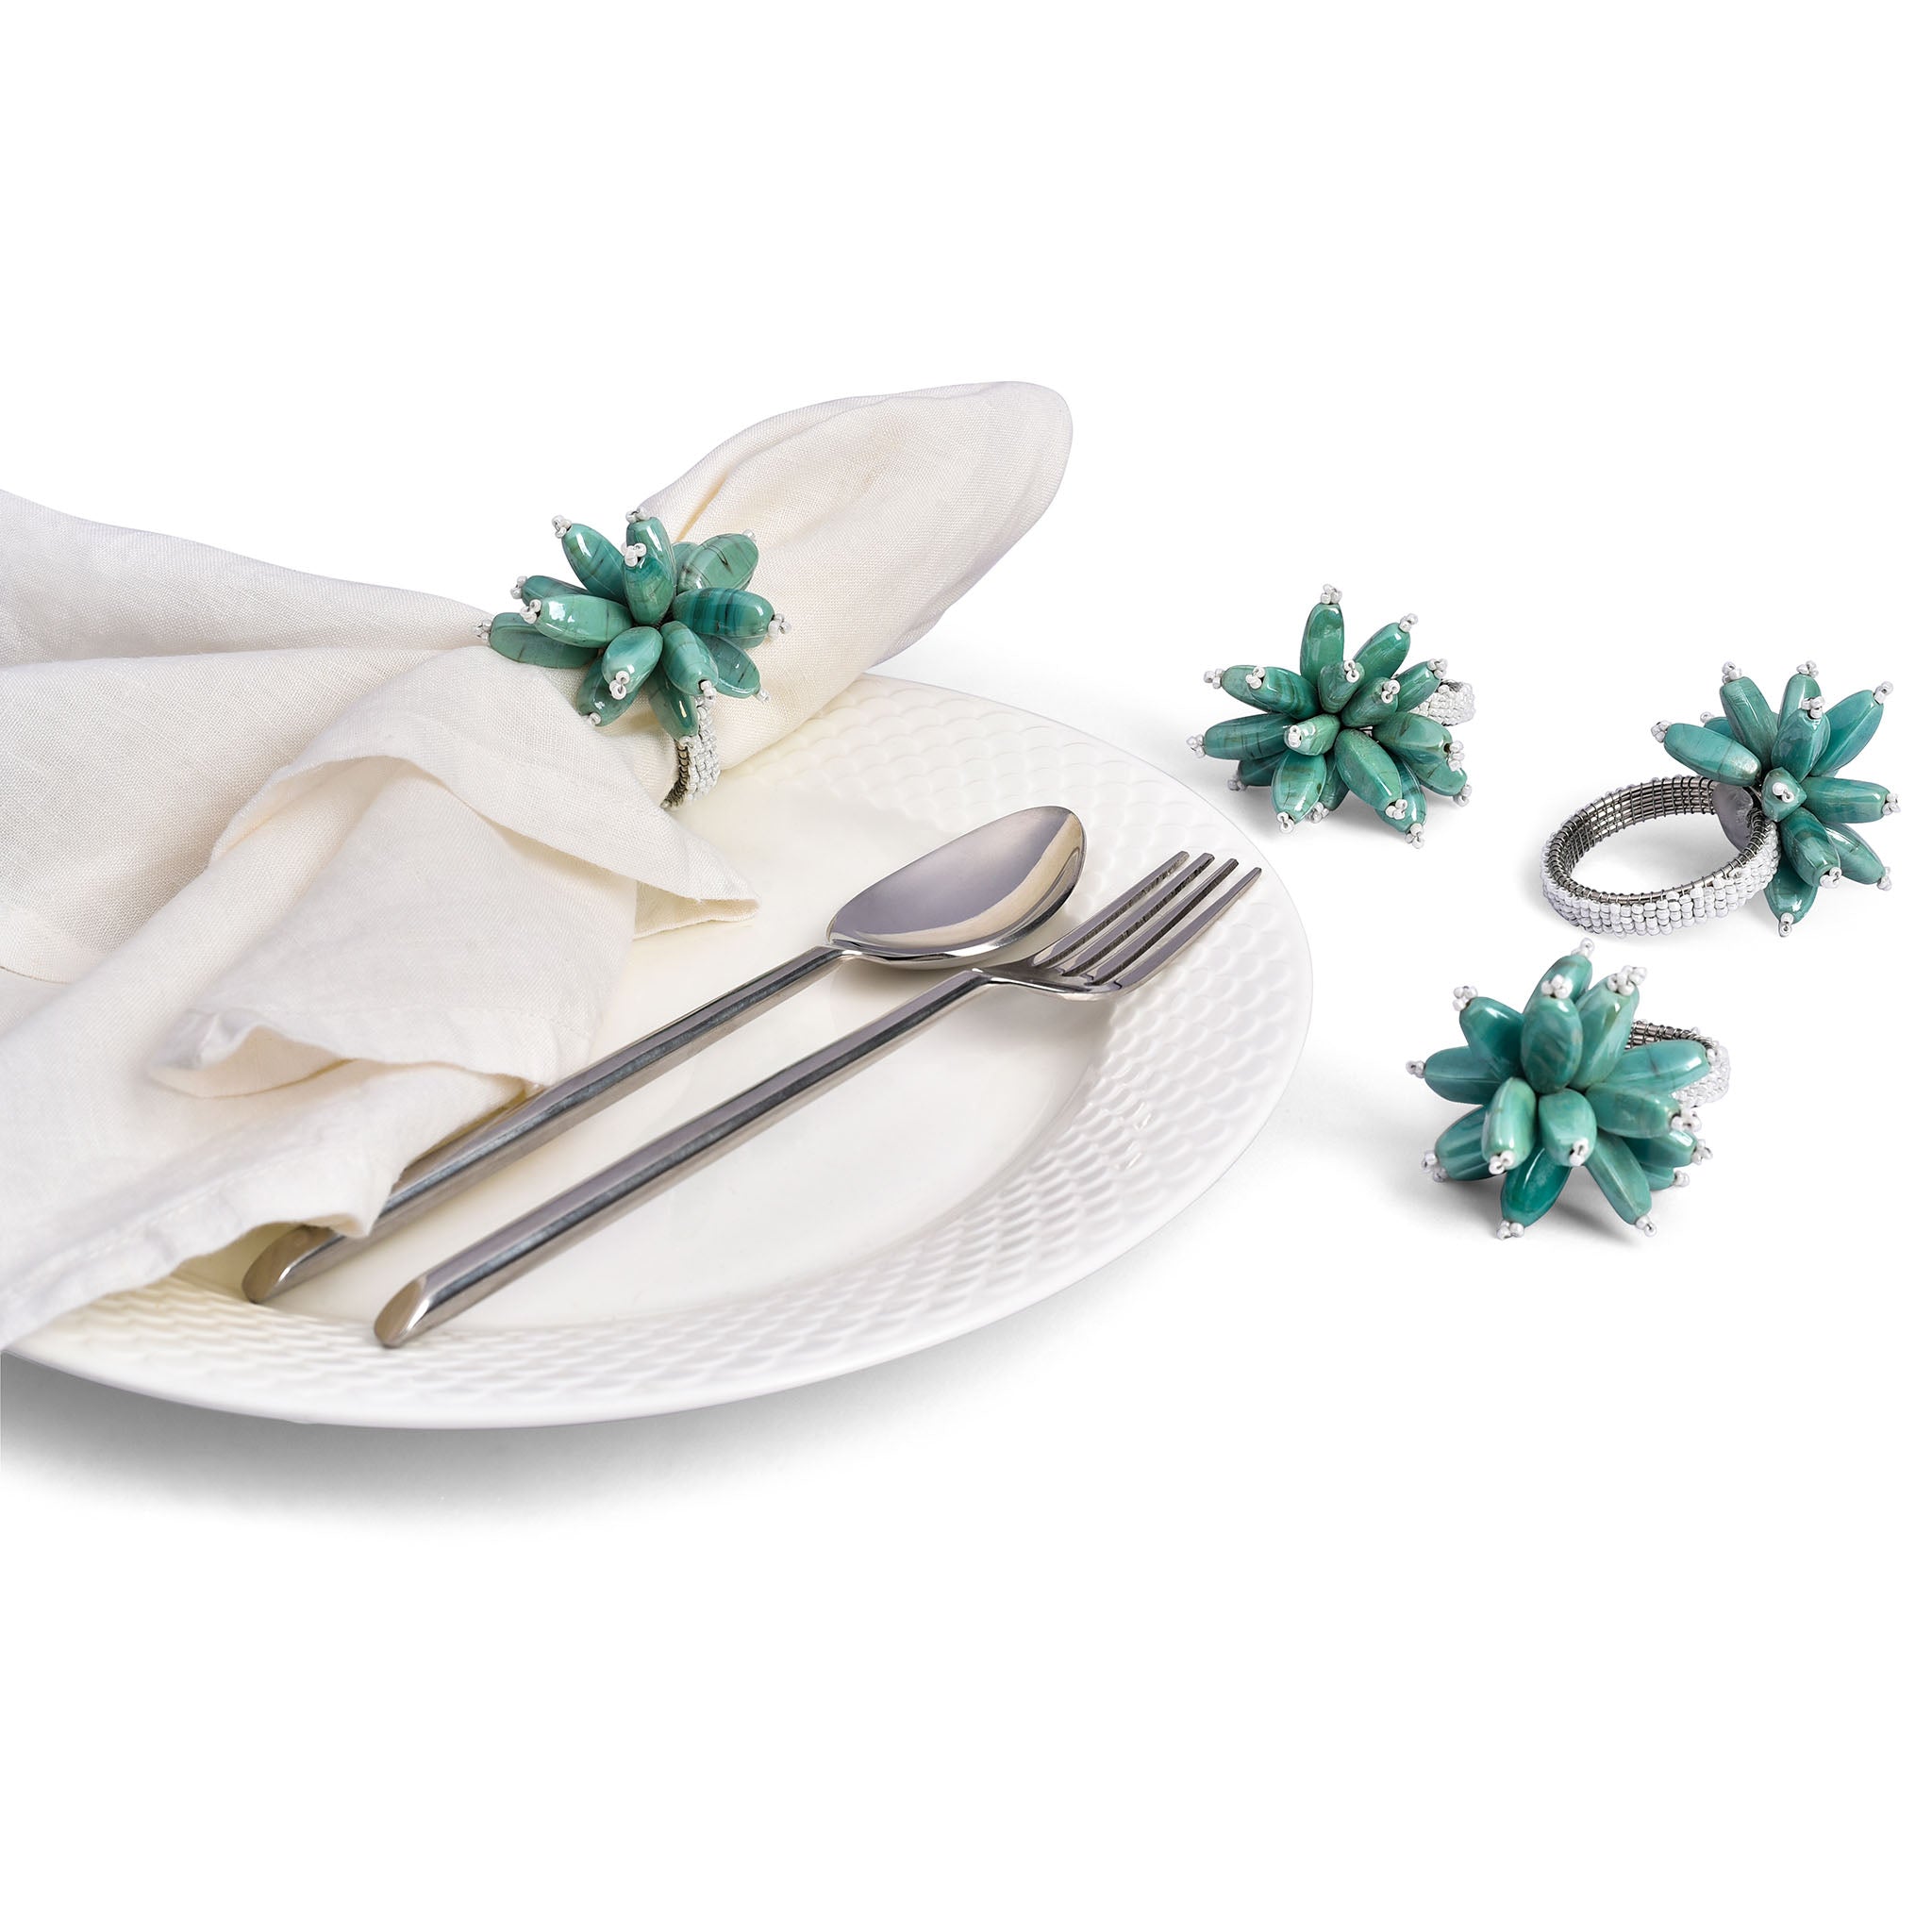 Clam -Up Table Setting for 4 - Embroidered Placemats, Napkin Rings & Table Runner in Teal